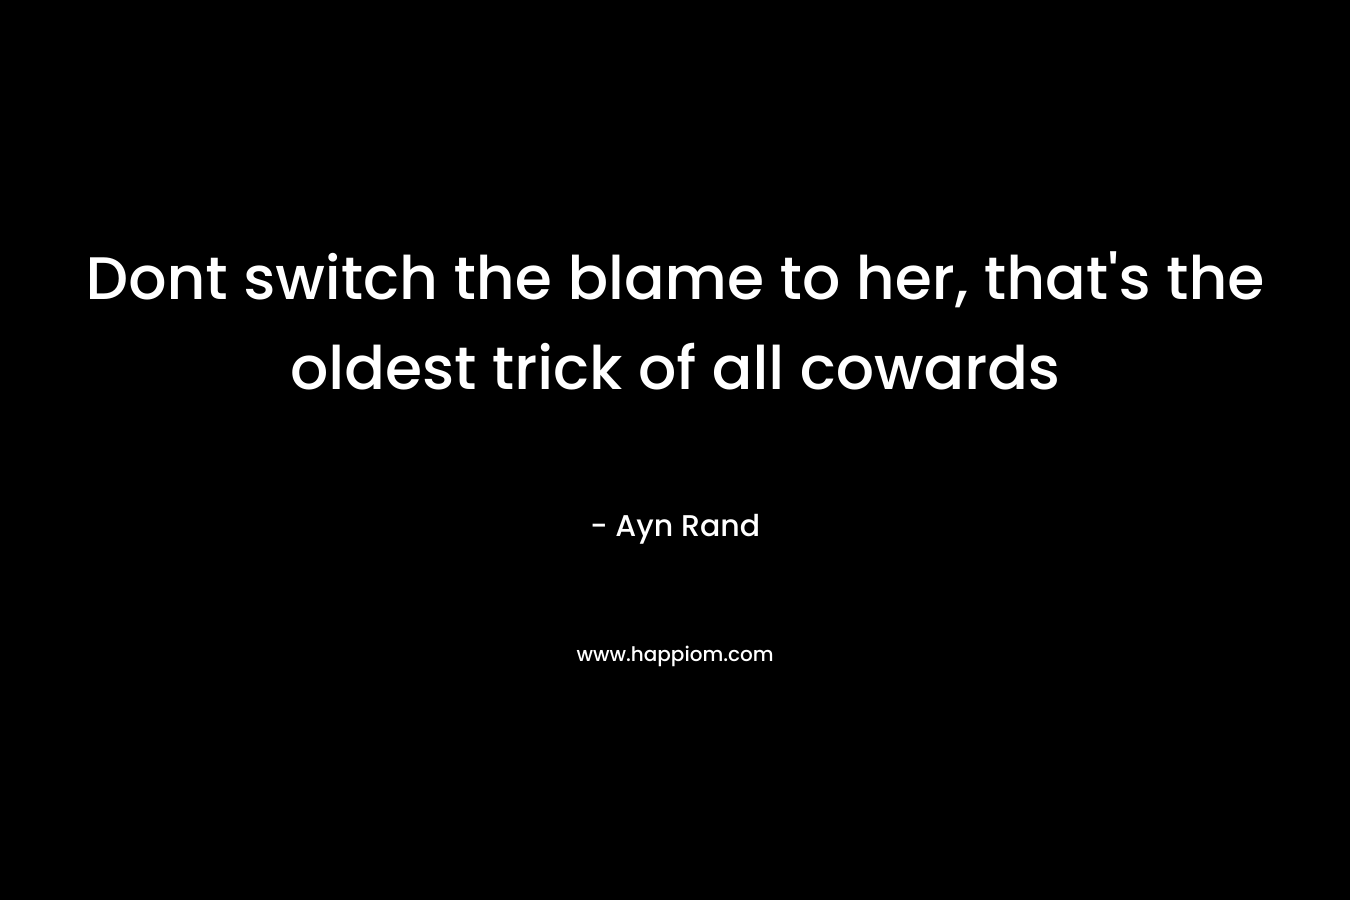 Dont switch the blame to her, that's the oldest trick of all cowards